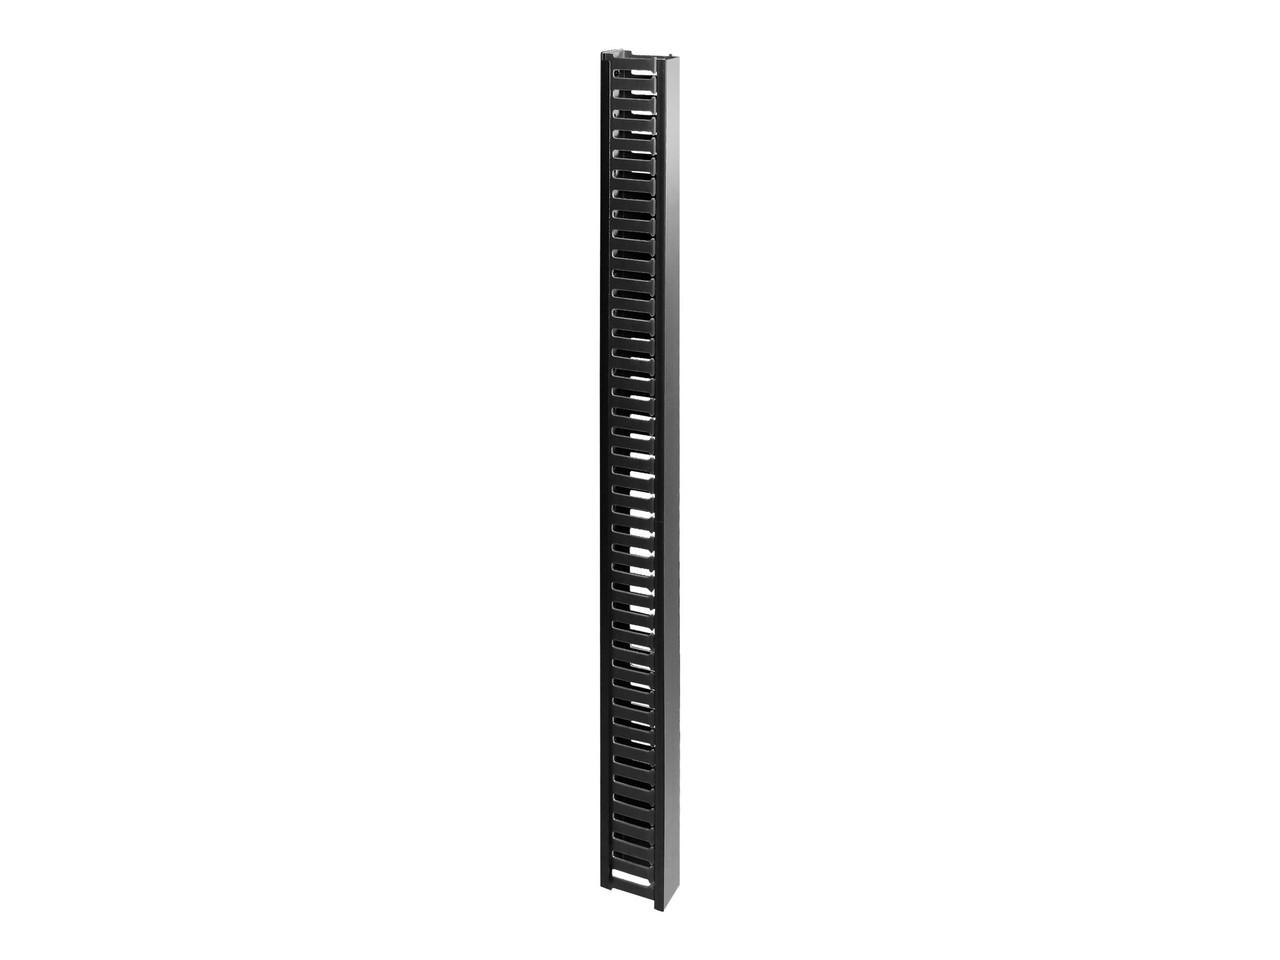 CyberPower Carbon CRA30001 - Rack Cable Management Finger Duct